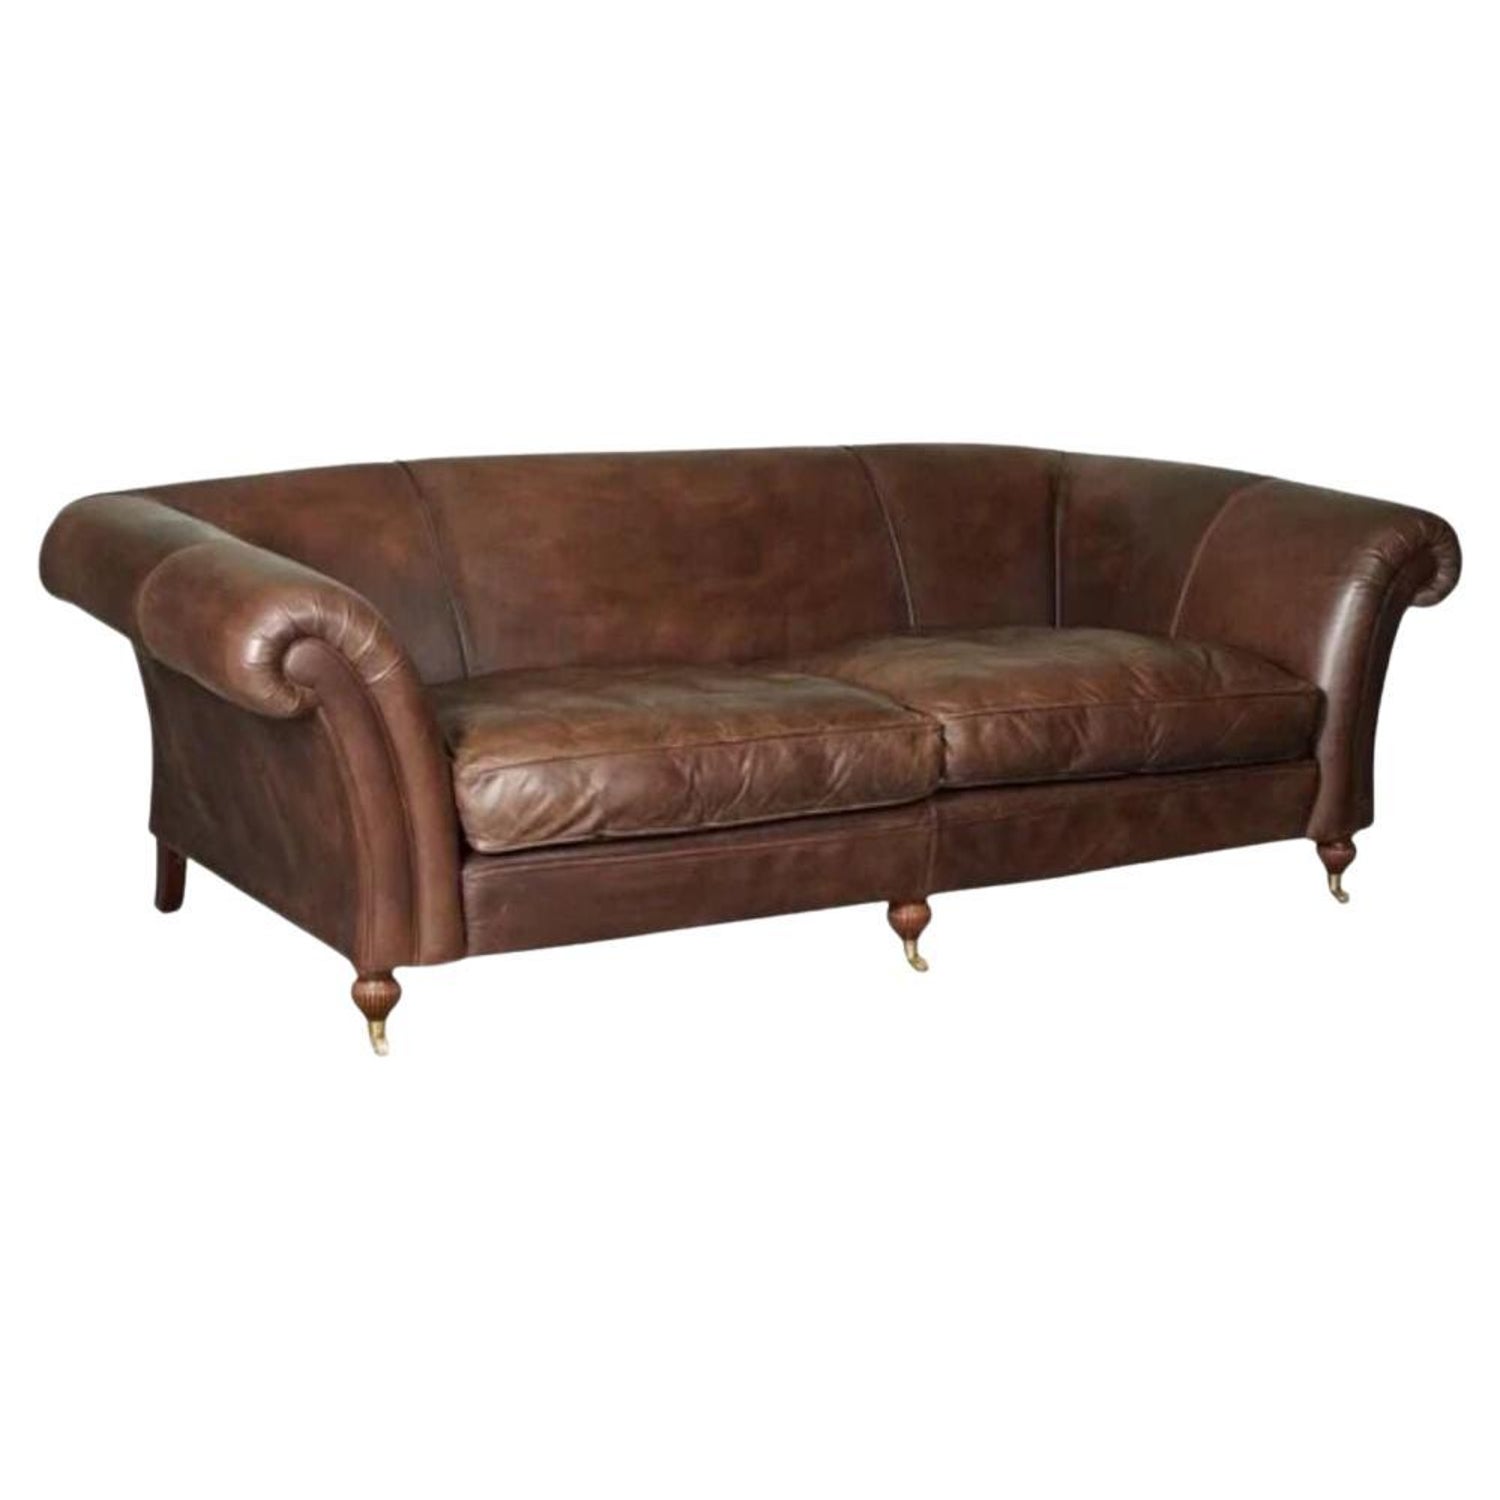 Stunning 1 of 2 Very Large Heritage Brown Leather Laura Ashley Mortimer  Sofas For Sale at 1stDibs | laura ashley leather sofas, laura ashley sofas,  laura ashley leather armchair